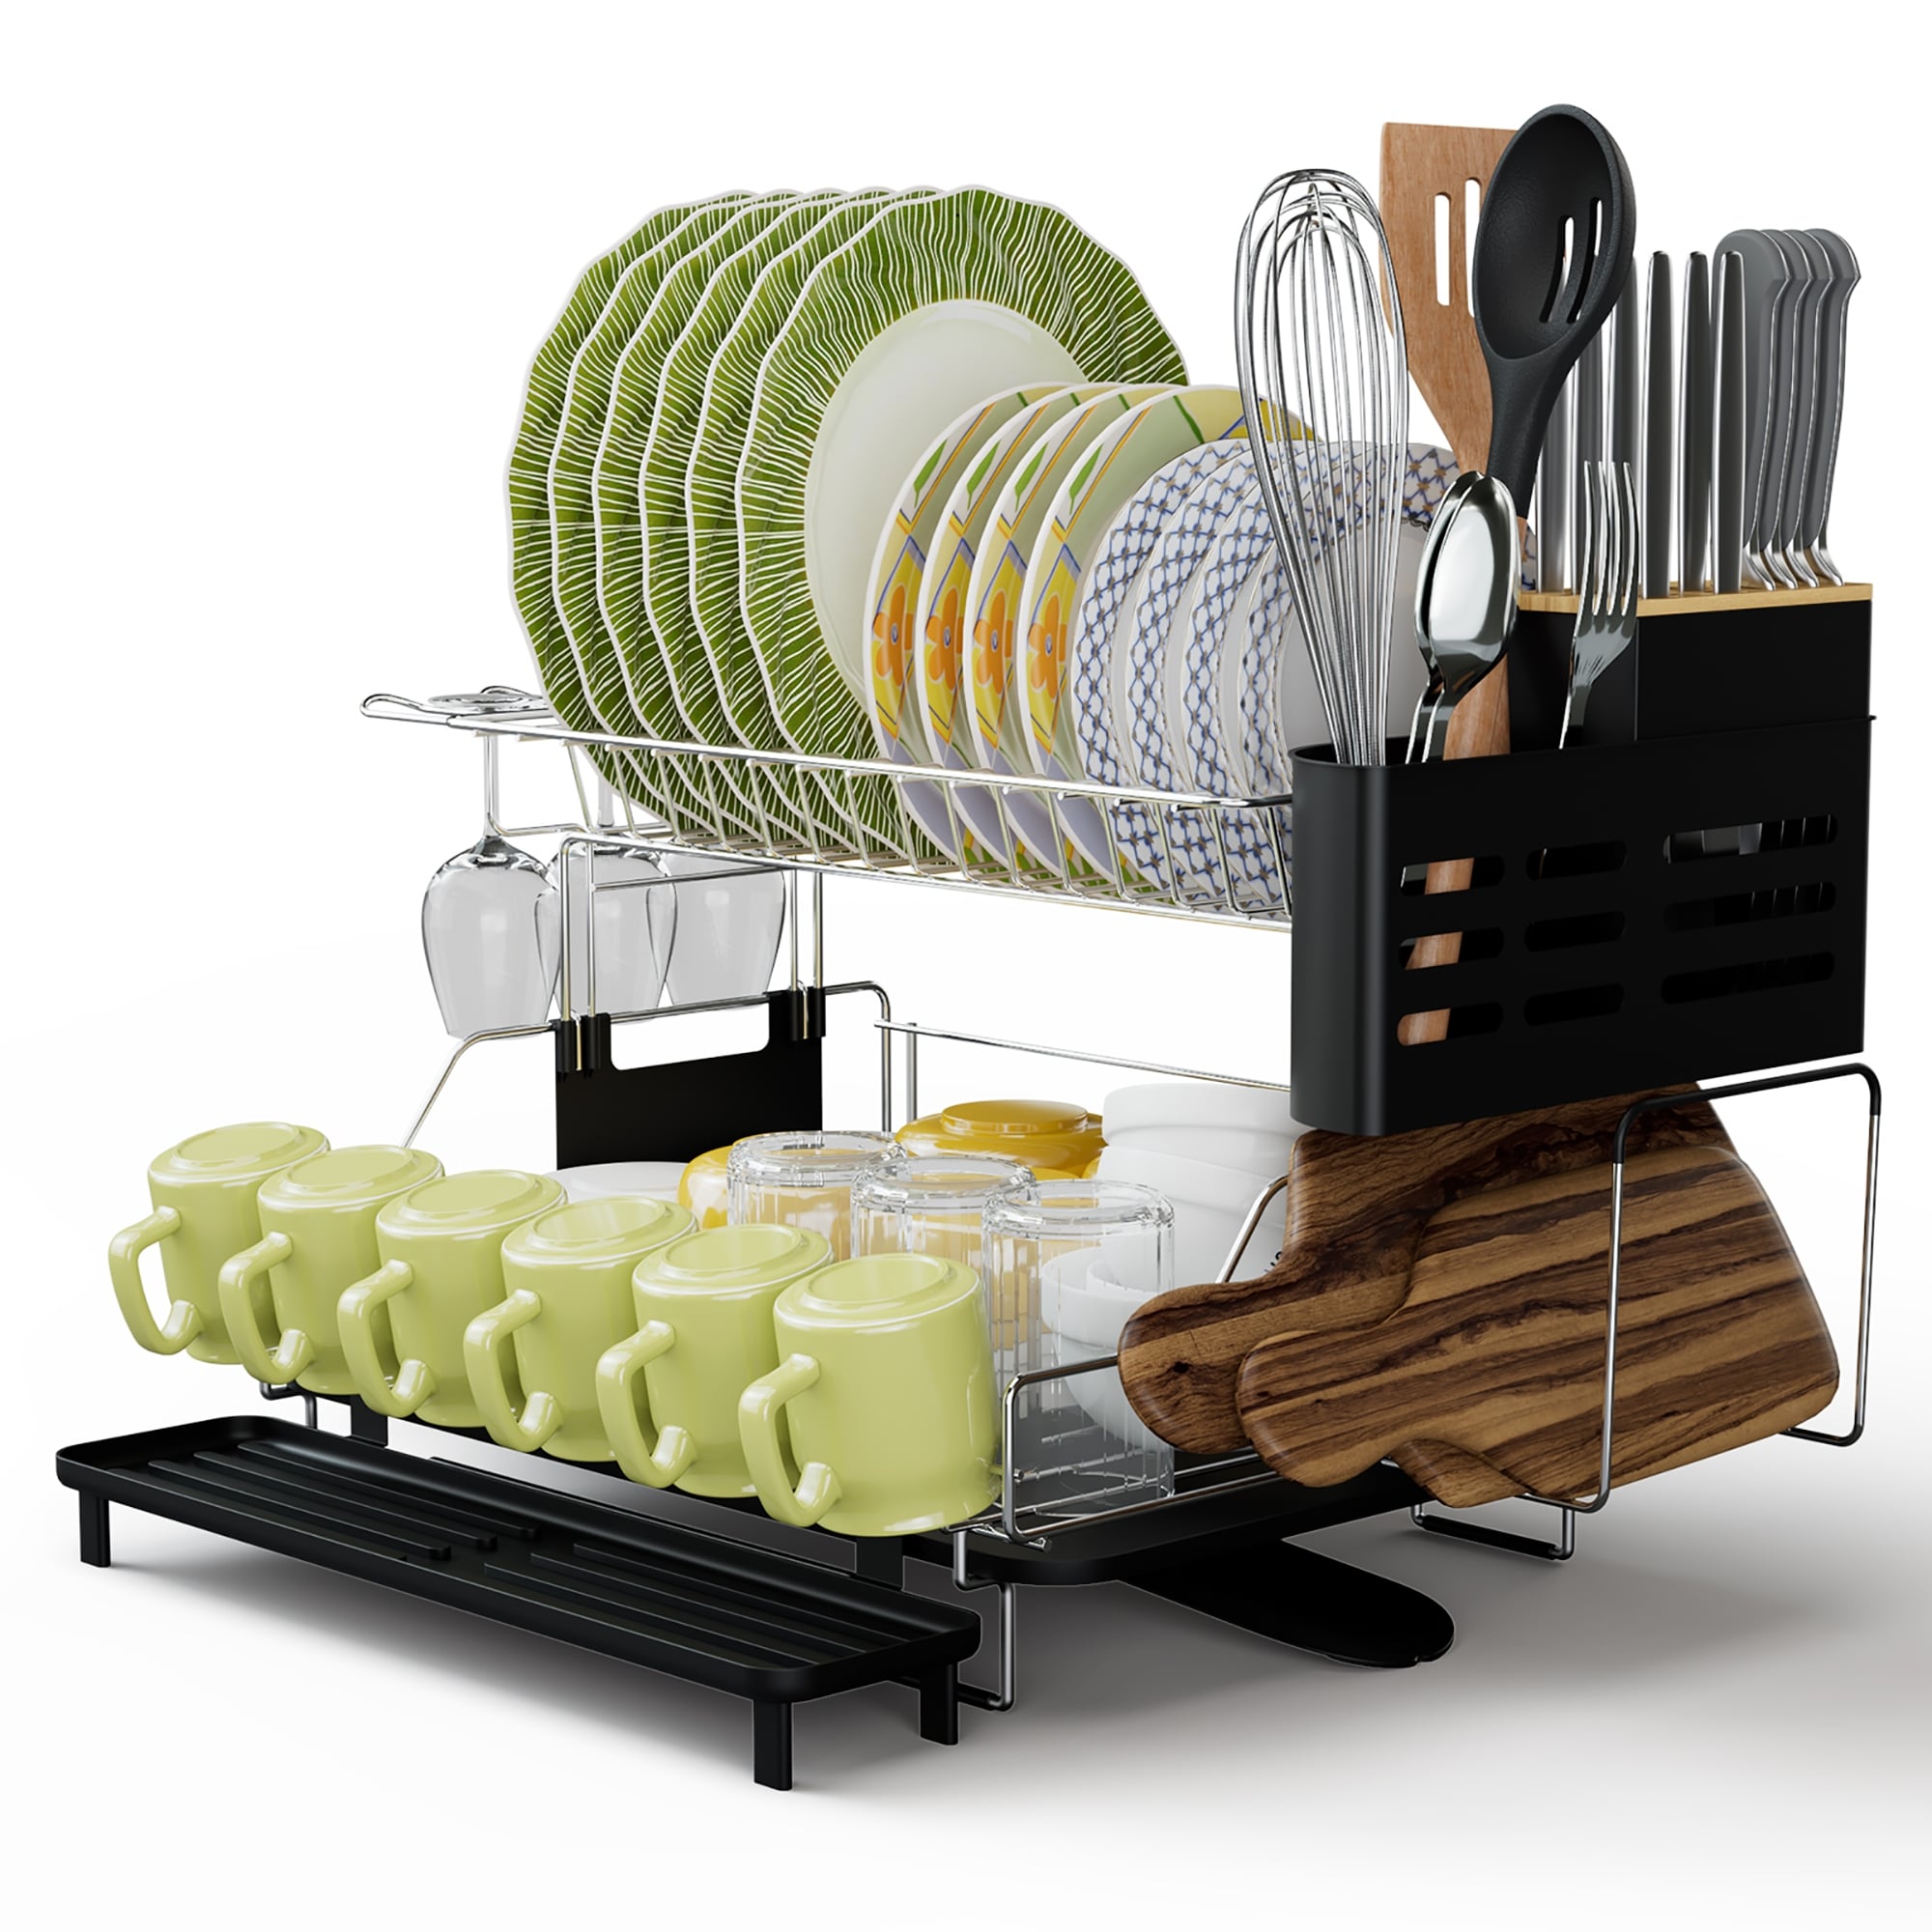 https://ak1.ostkcdn.com/images/products/is/images/direct/dafeac71316412b0f96400a66820019dfb1ecc73/Costway-Dish-Drying-Rack-Detachable-2-Tier-Dish-Rack-with-Drainboard.jpg